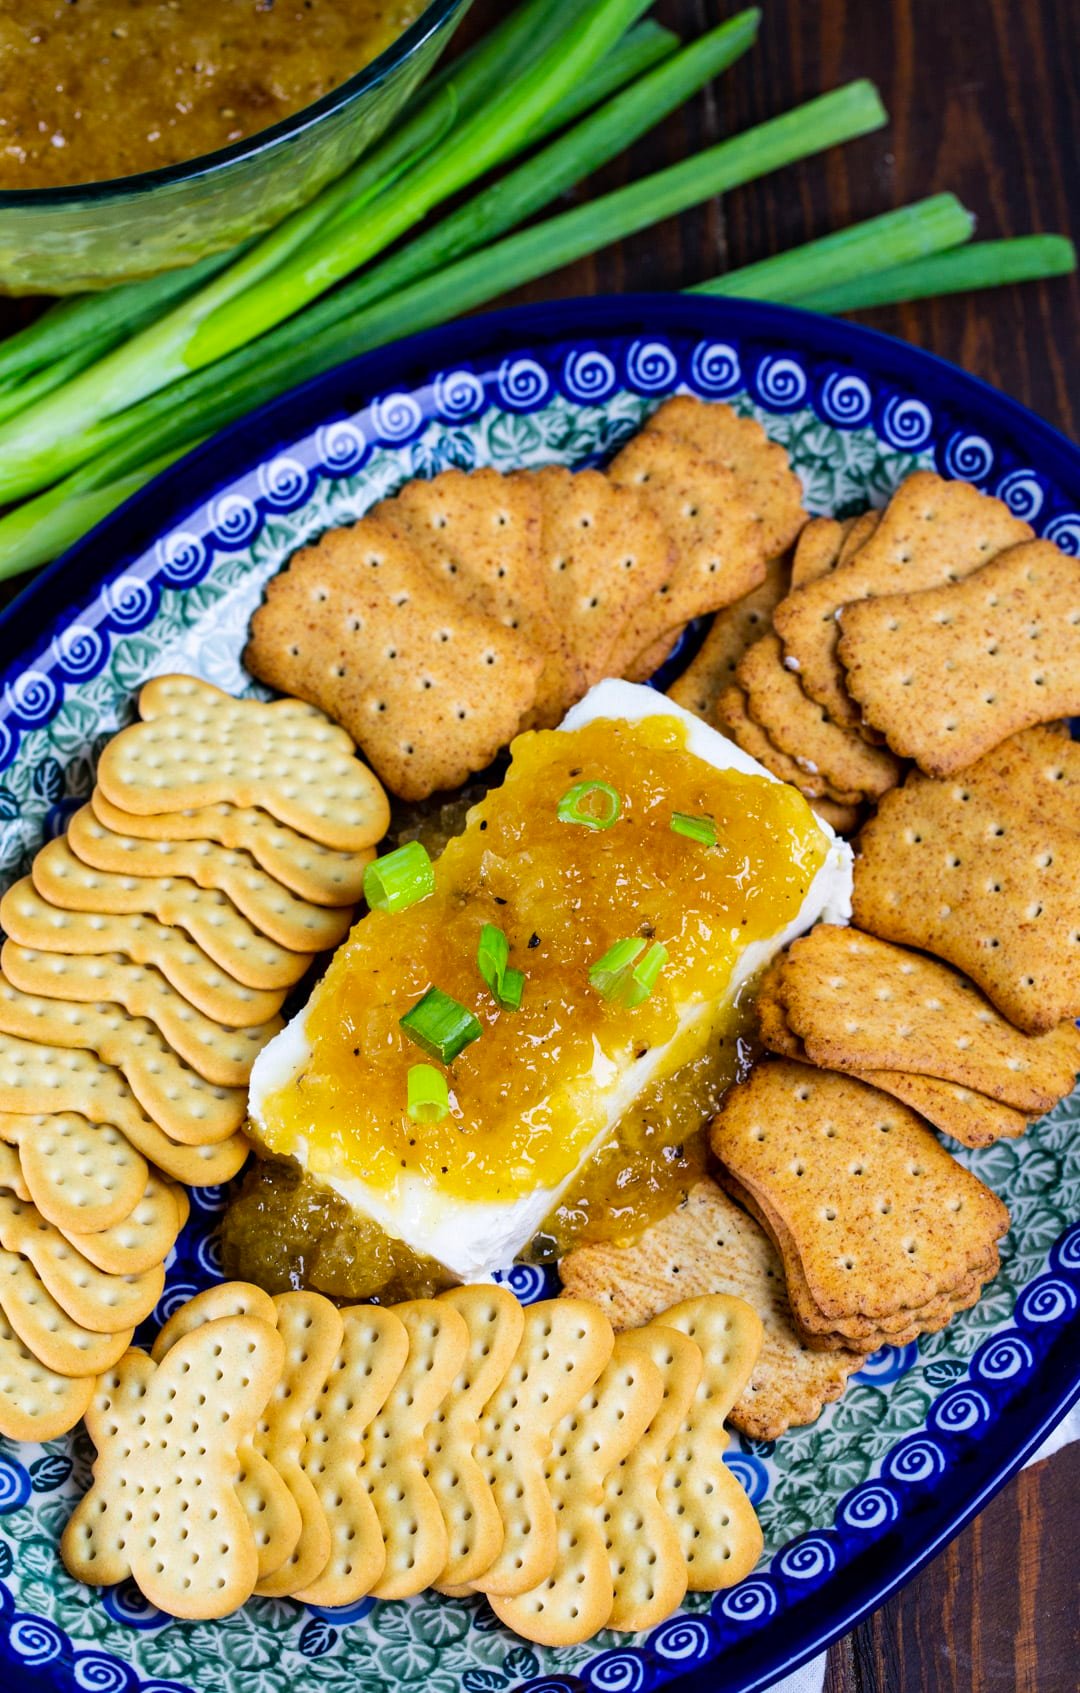 Cream cheese topped with sauce on a platter with crackers.